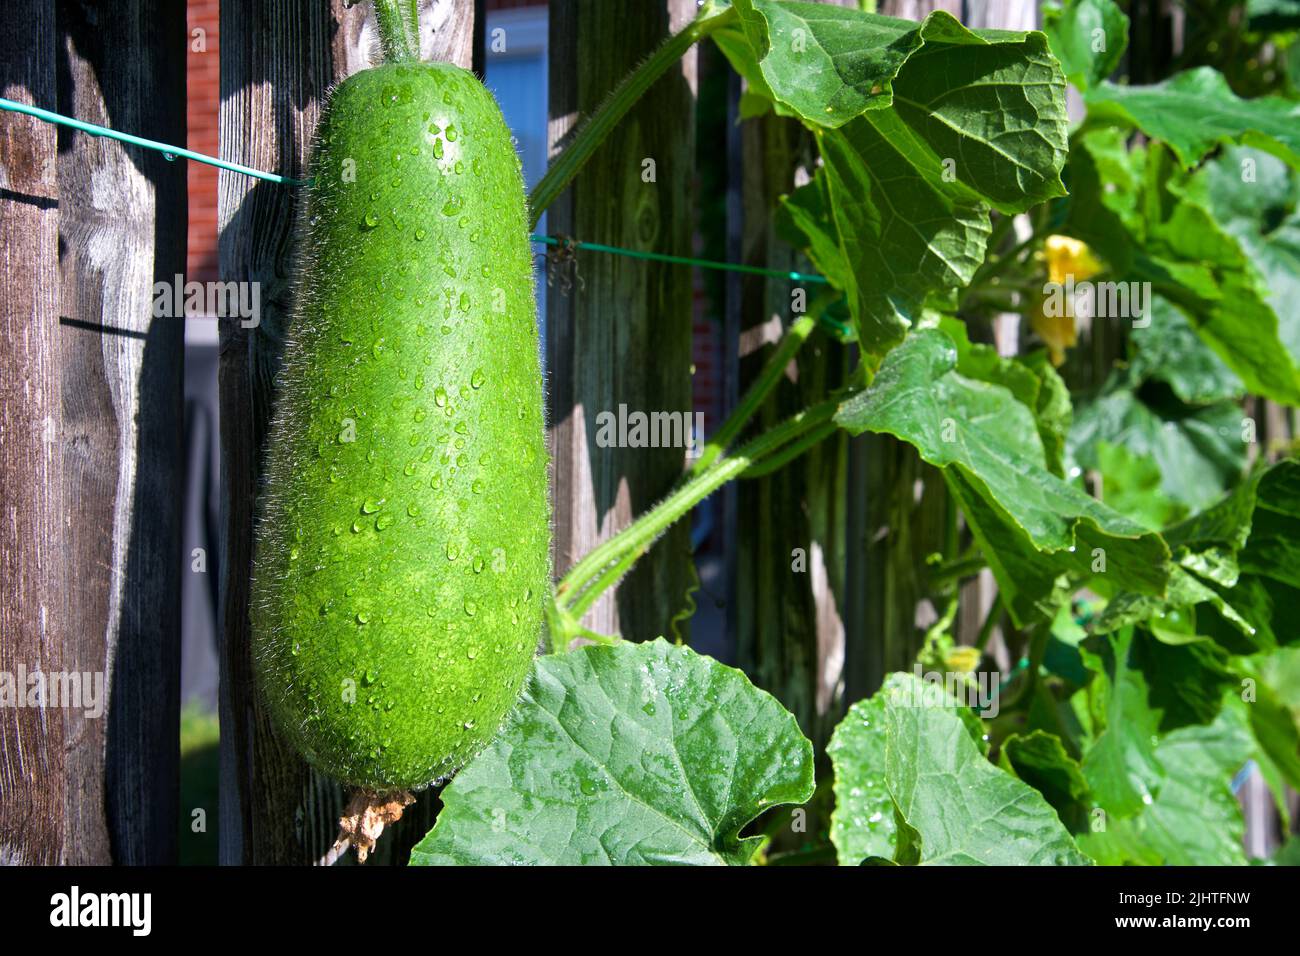 Organic fuzzy melon climbing up the fence, part of an urban gardening project, seen on a sunny summer day Stock Photo